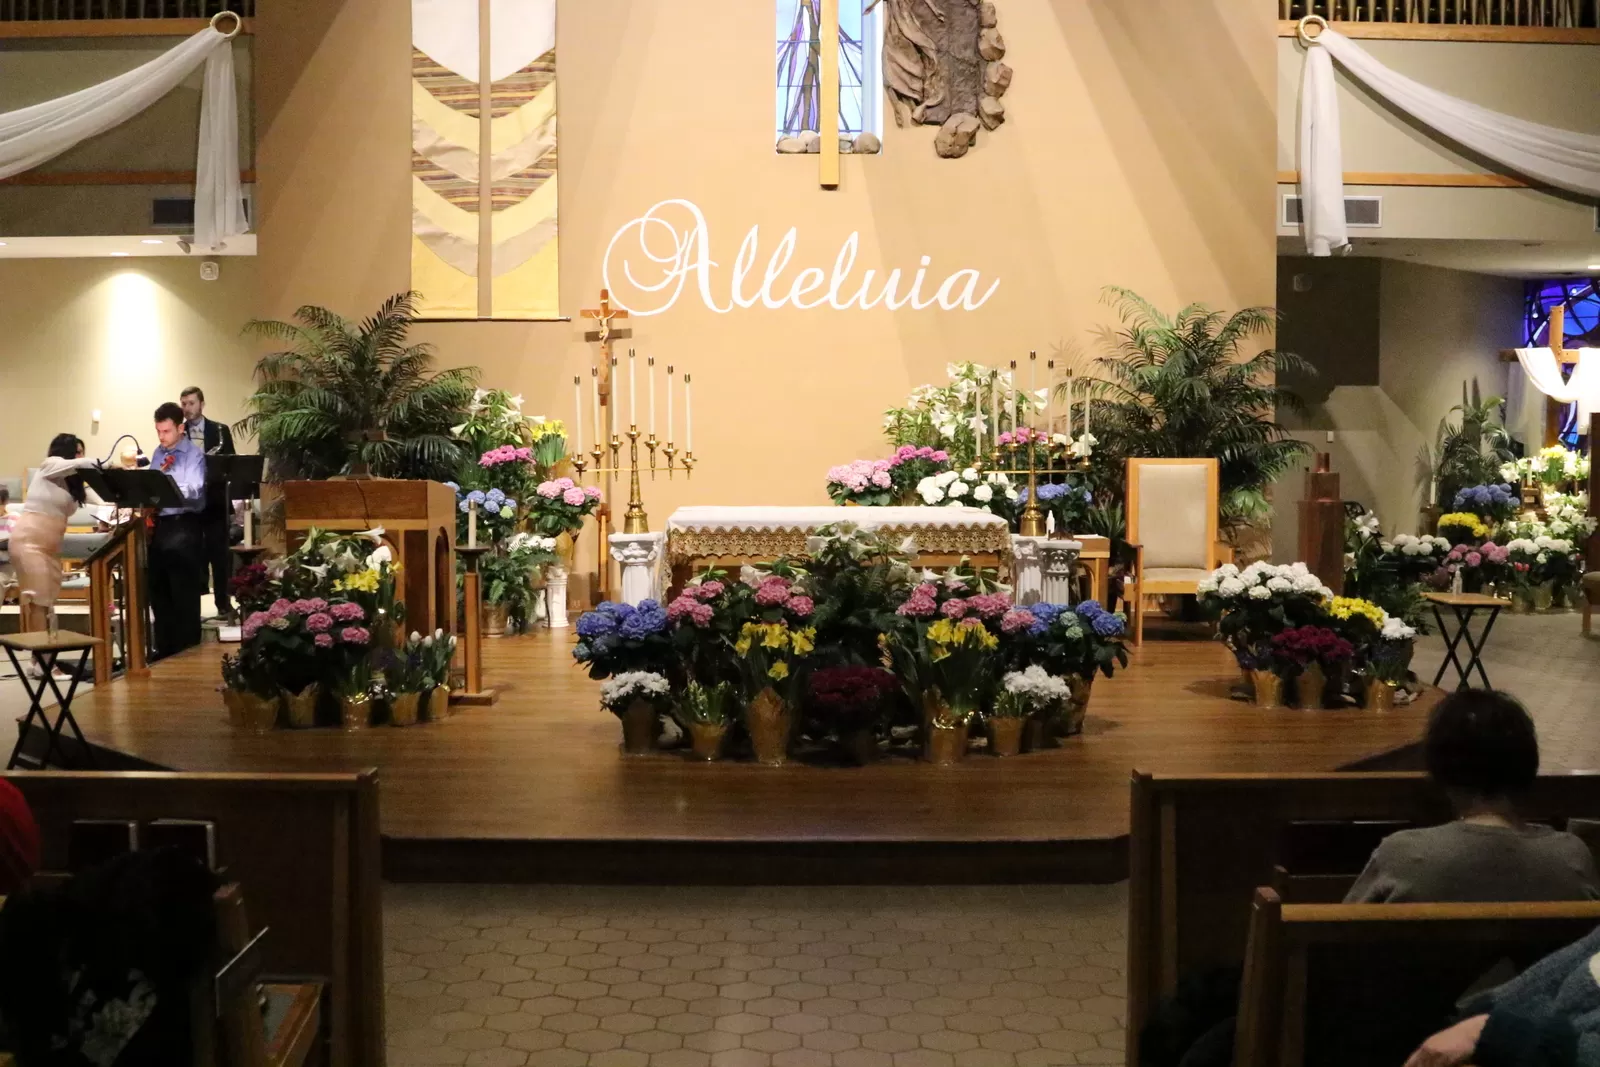 St. Edith Church decorated for Easter